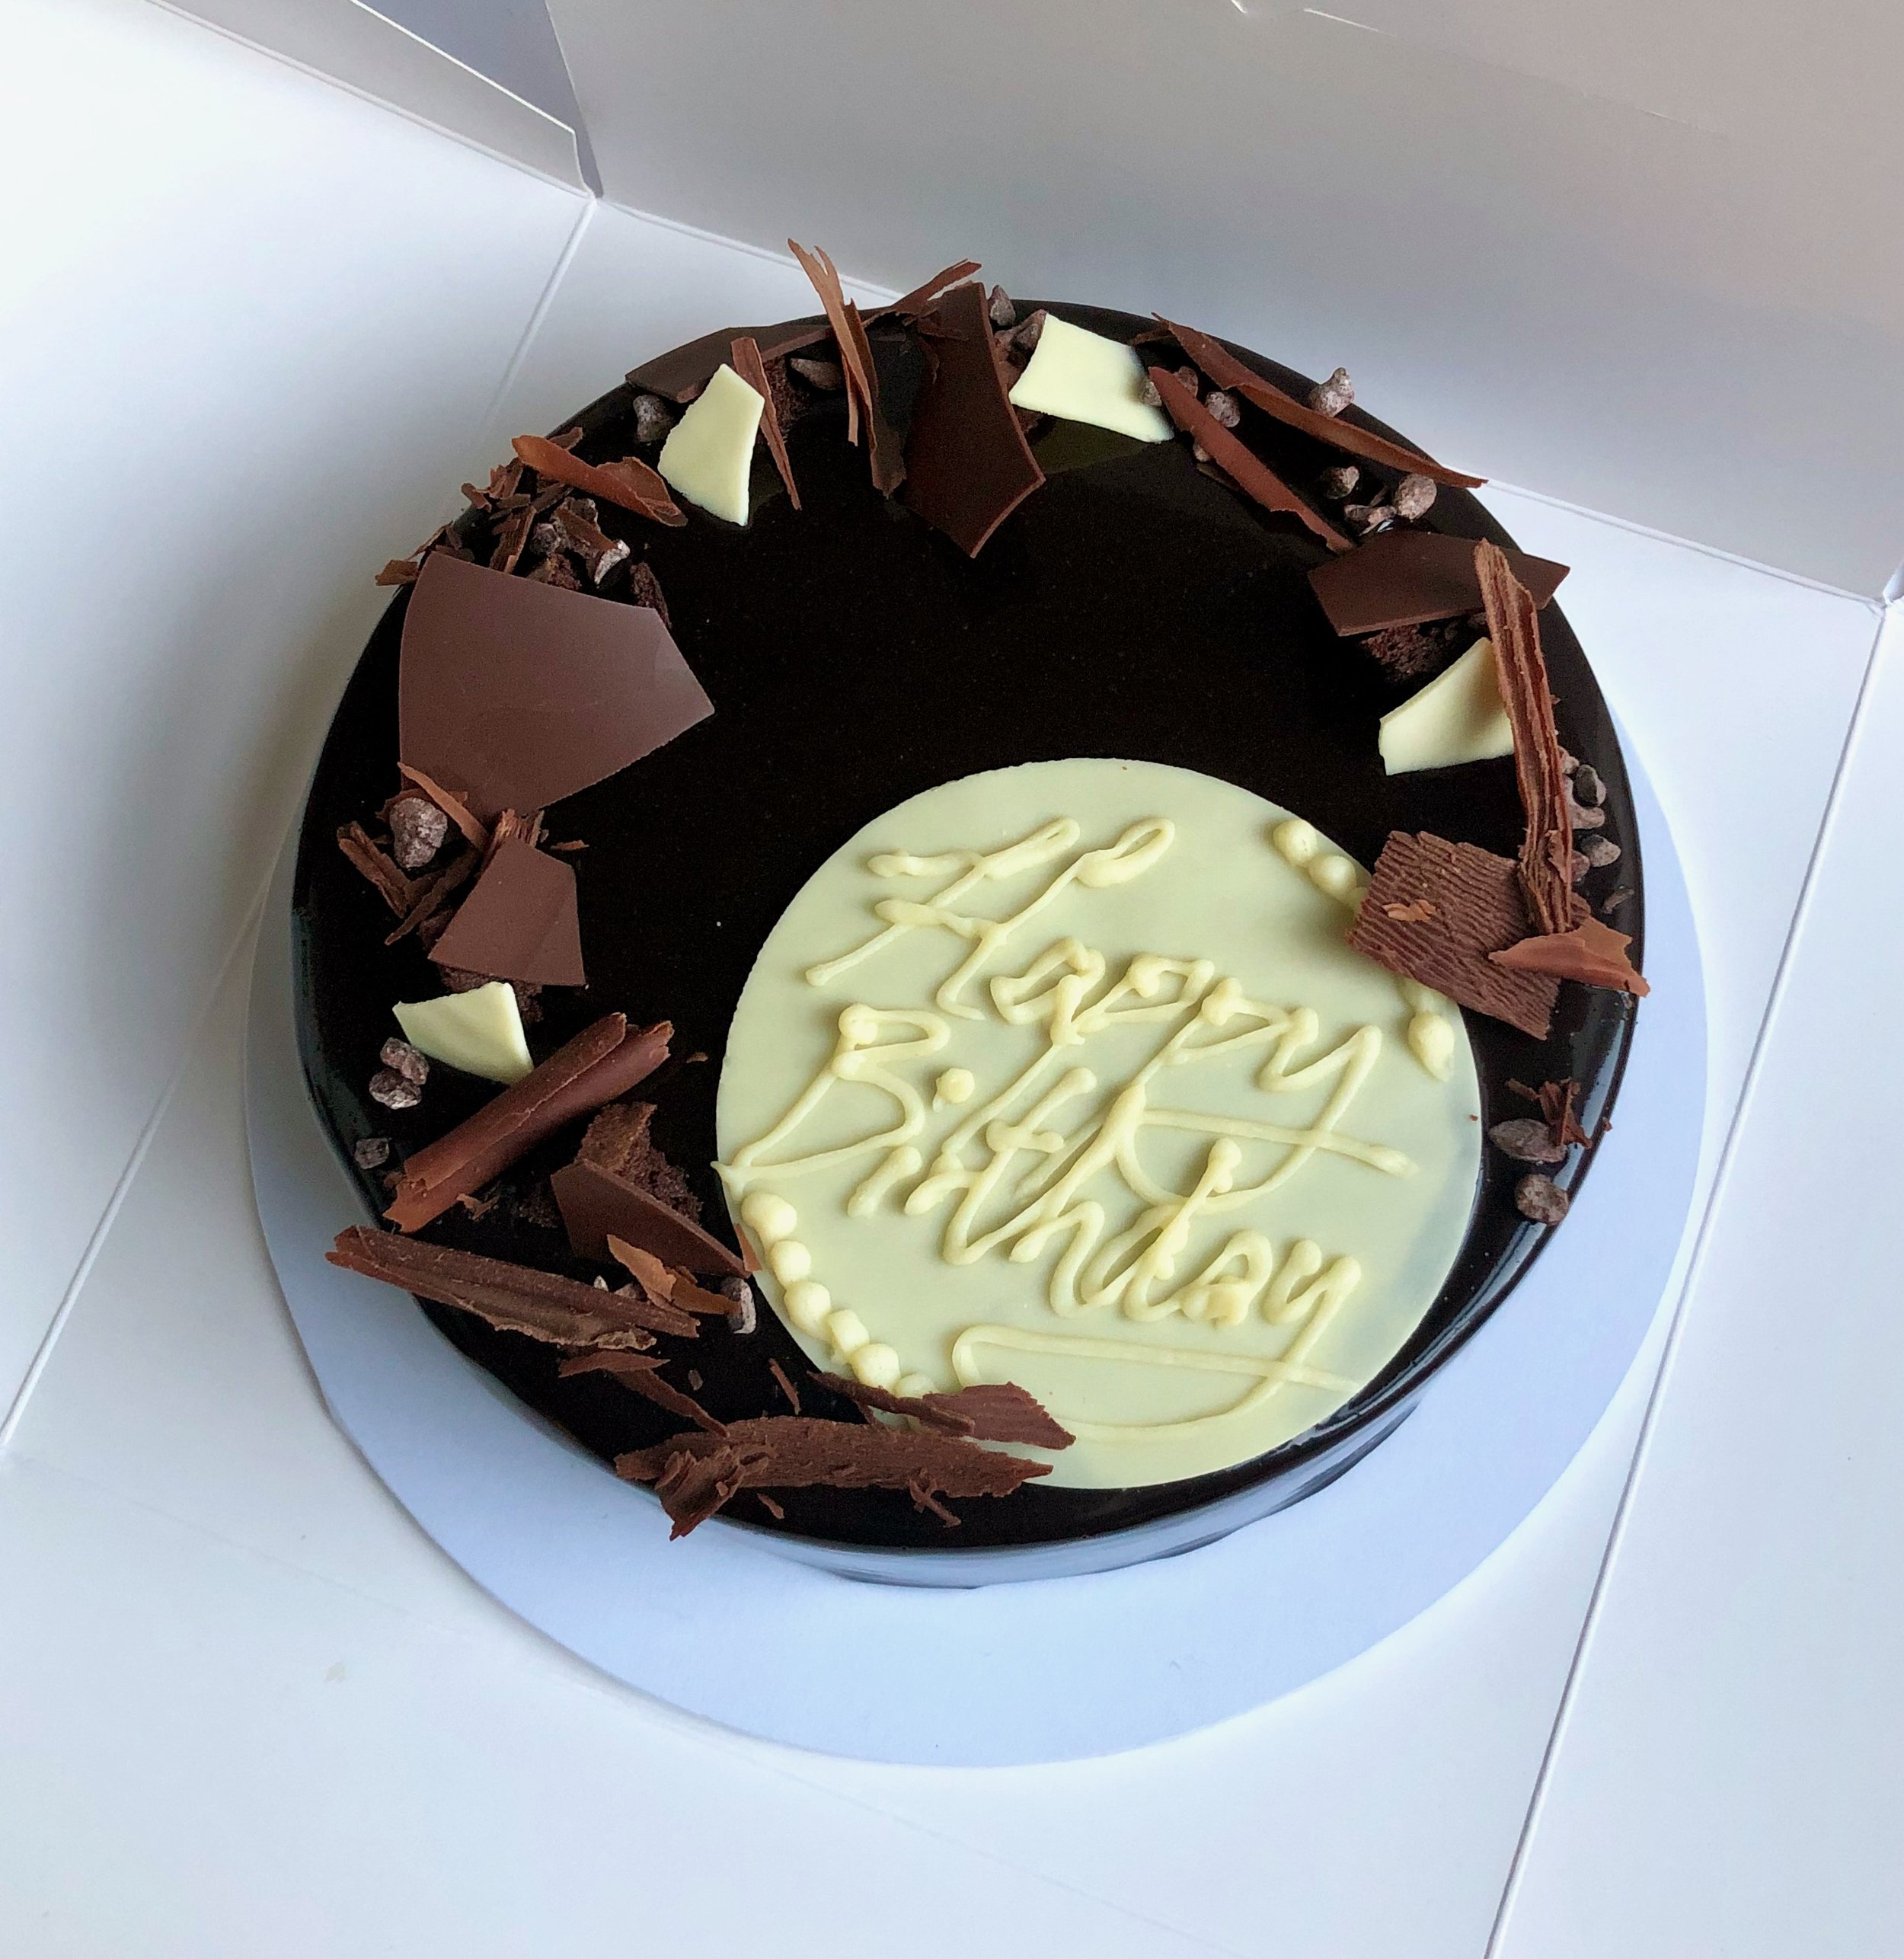 CHOCOLATE MOUSSE CAKE  - with birthday plaque